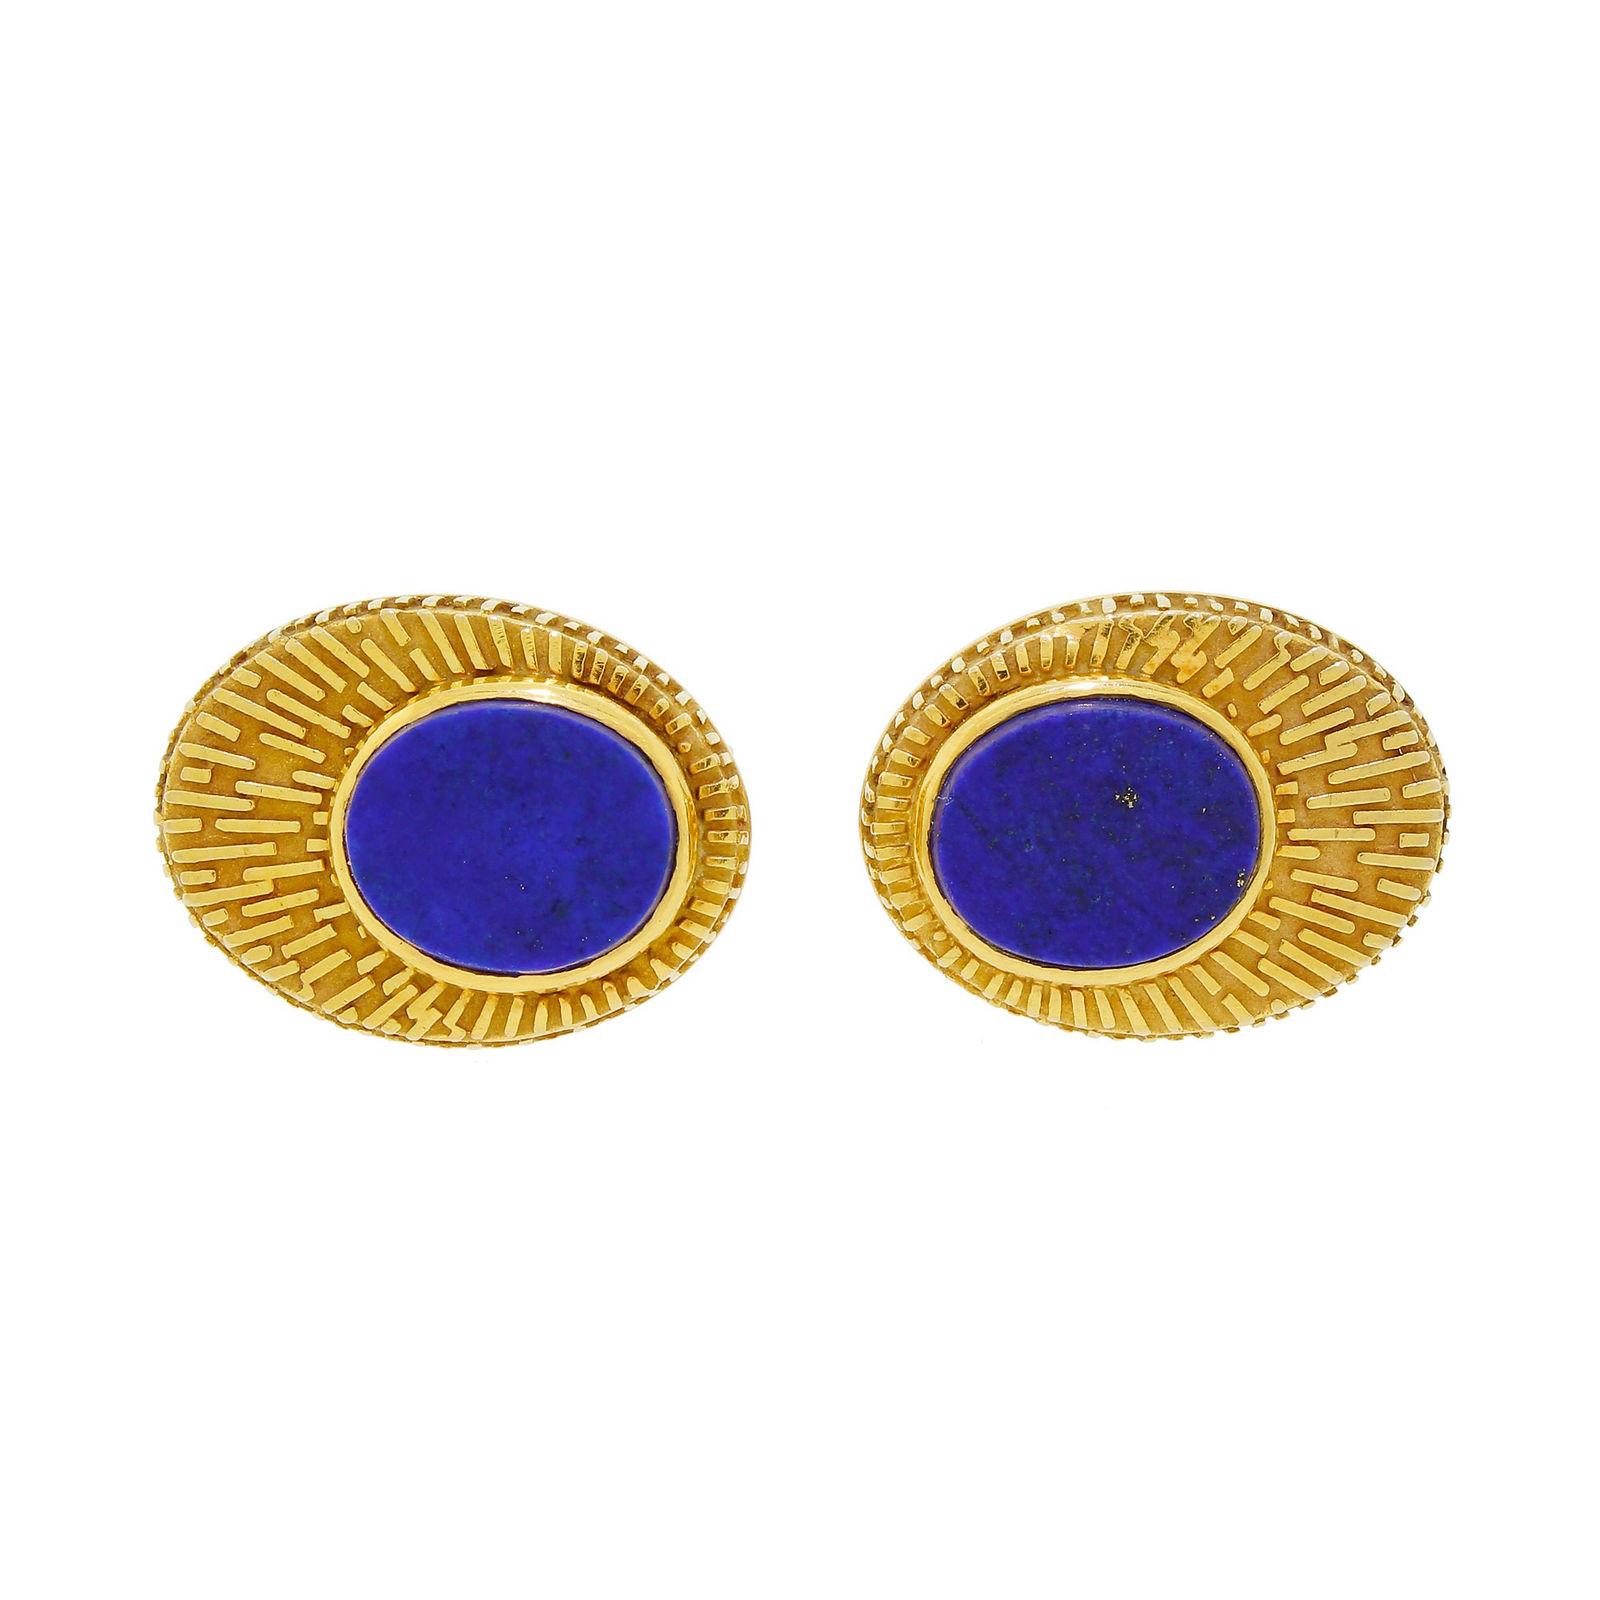 Vintage 14 Karat Gold Men's Lapis Cufflinks by La Triomphe 14.95 Gram Full Size In Good Condition For Sale In Lauderdale by the Sea, FL